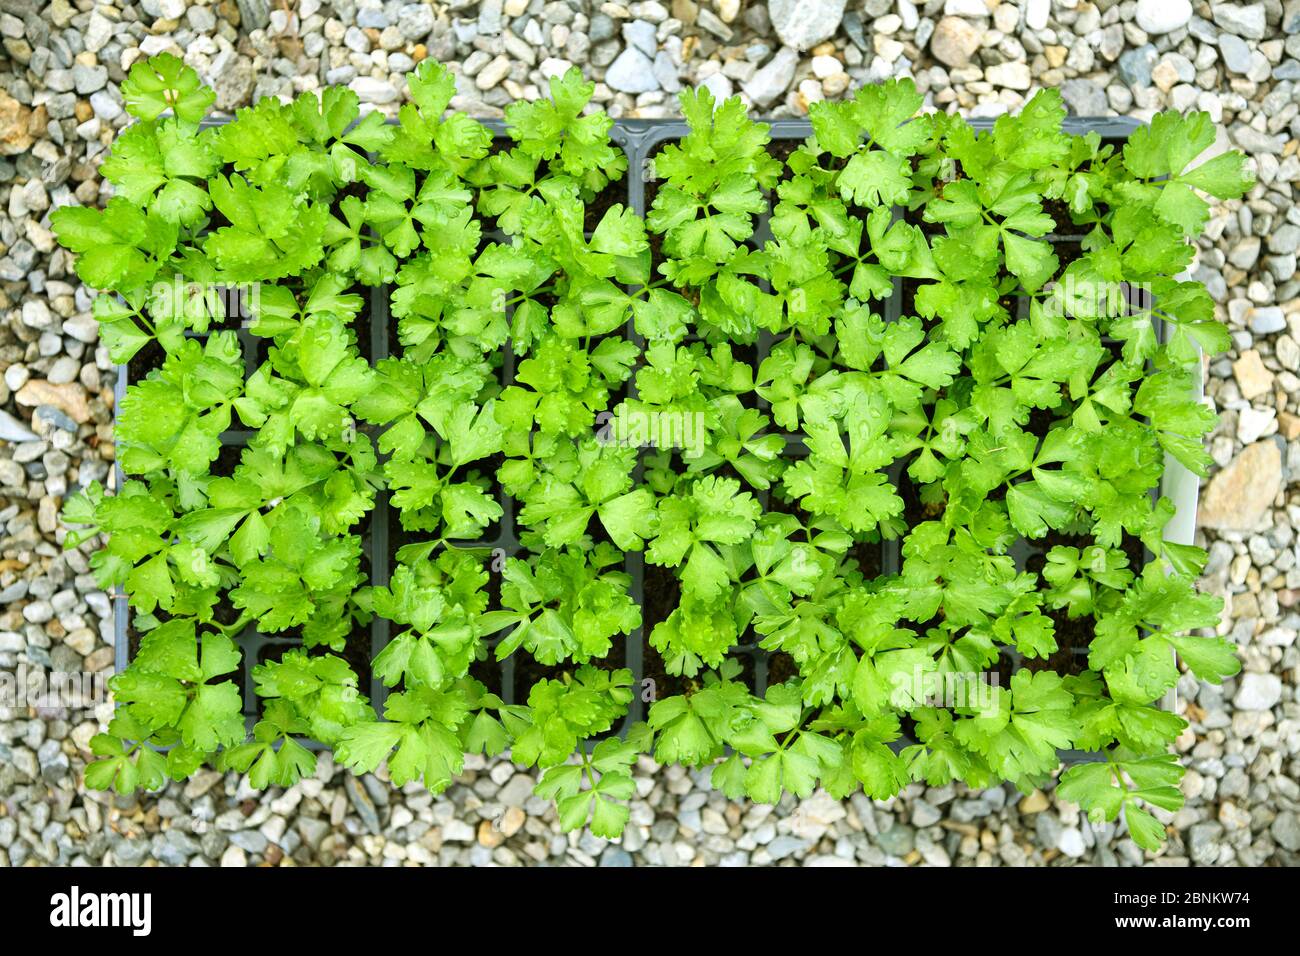 Tray of leafy green celery seedlings in a nursery ready for transplanting and propagation viewed from overhead in spring Stock Photo